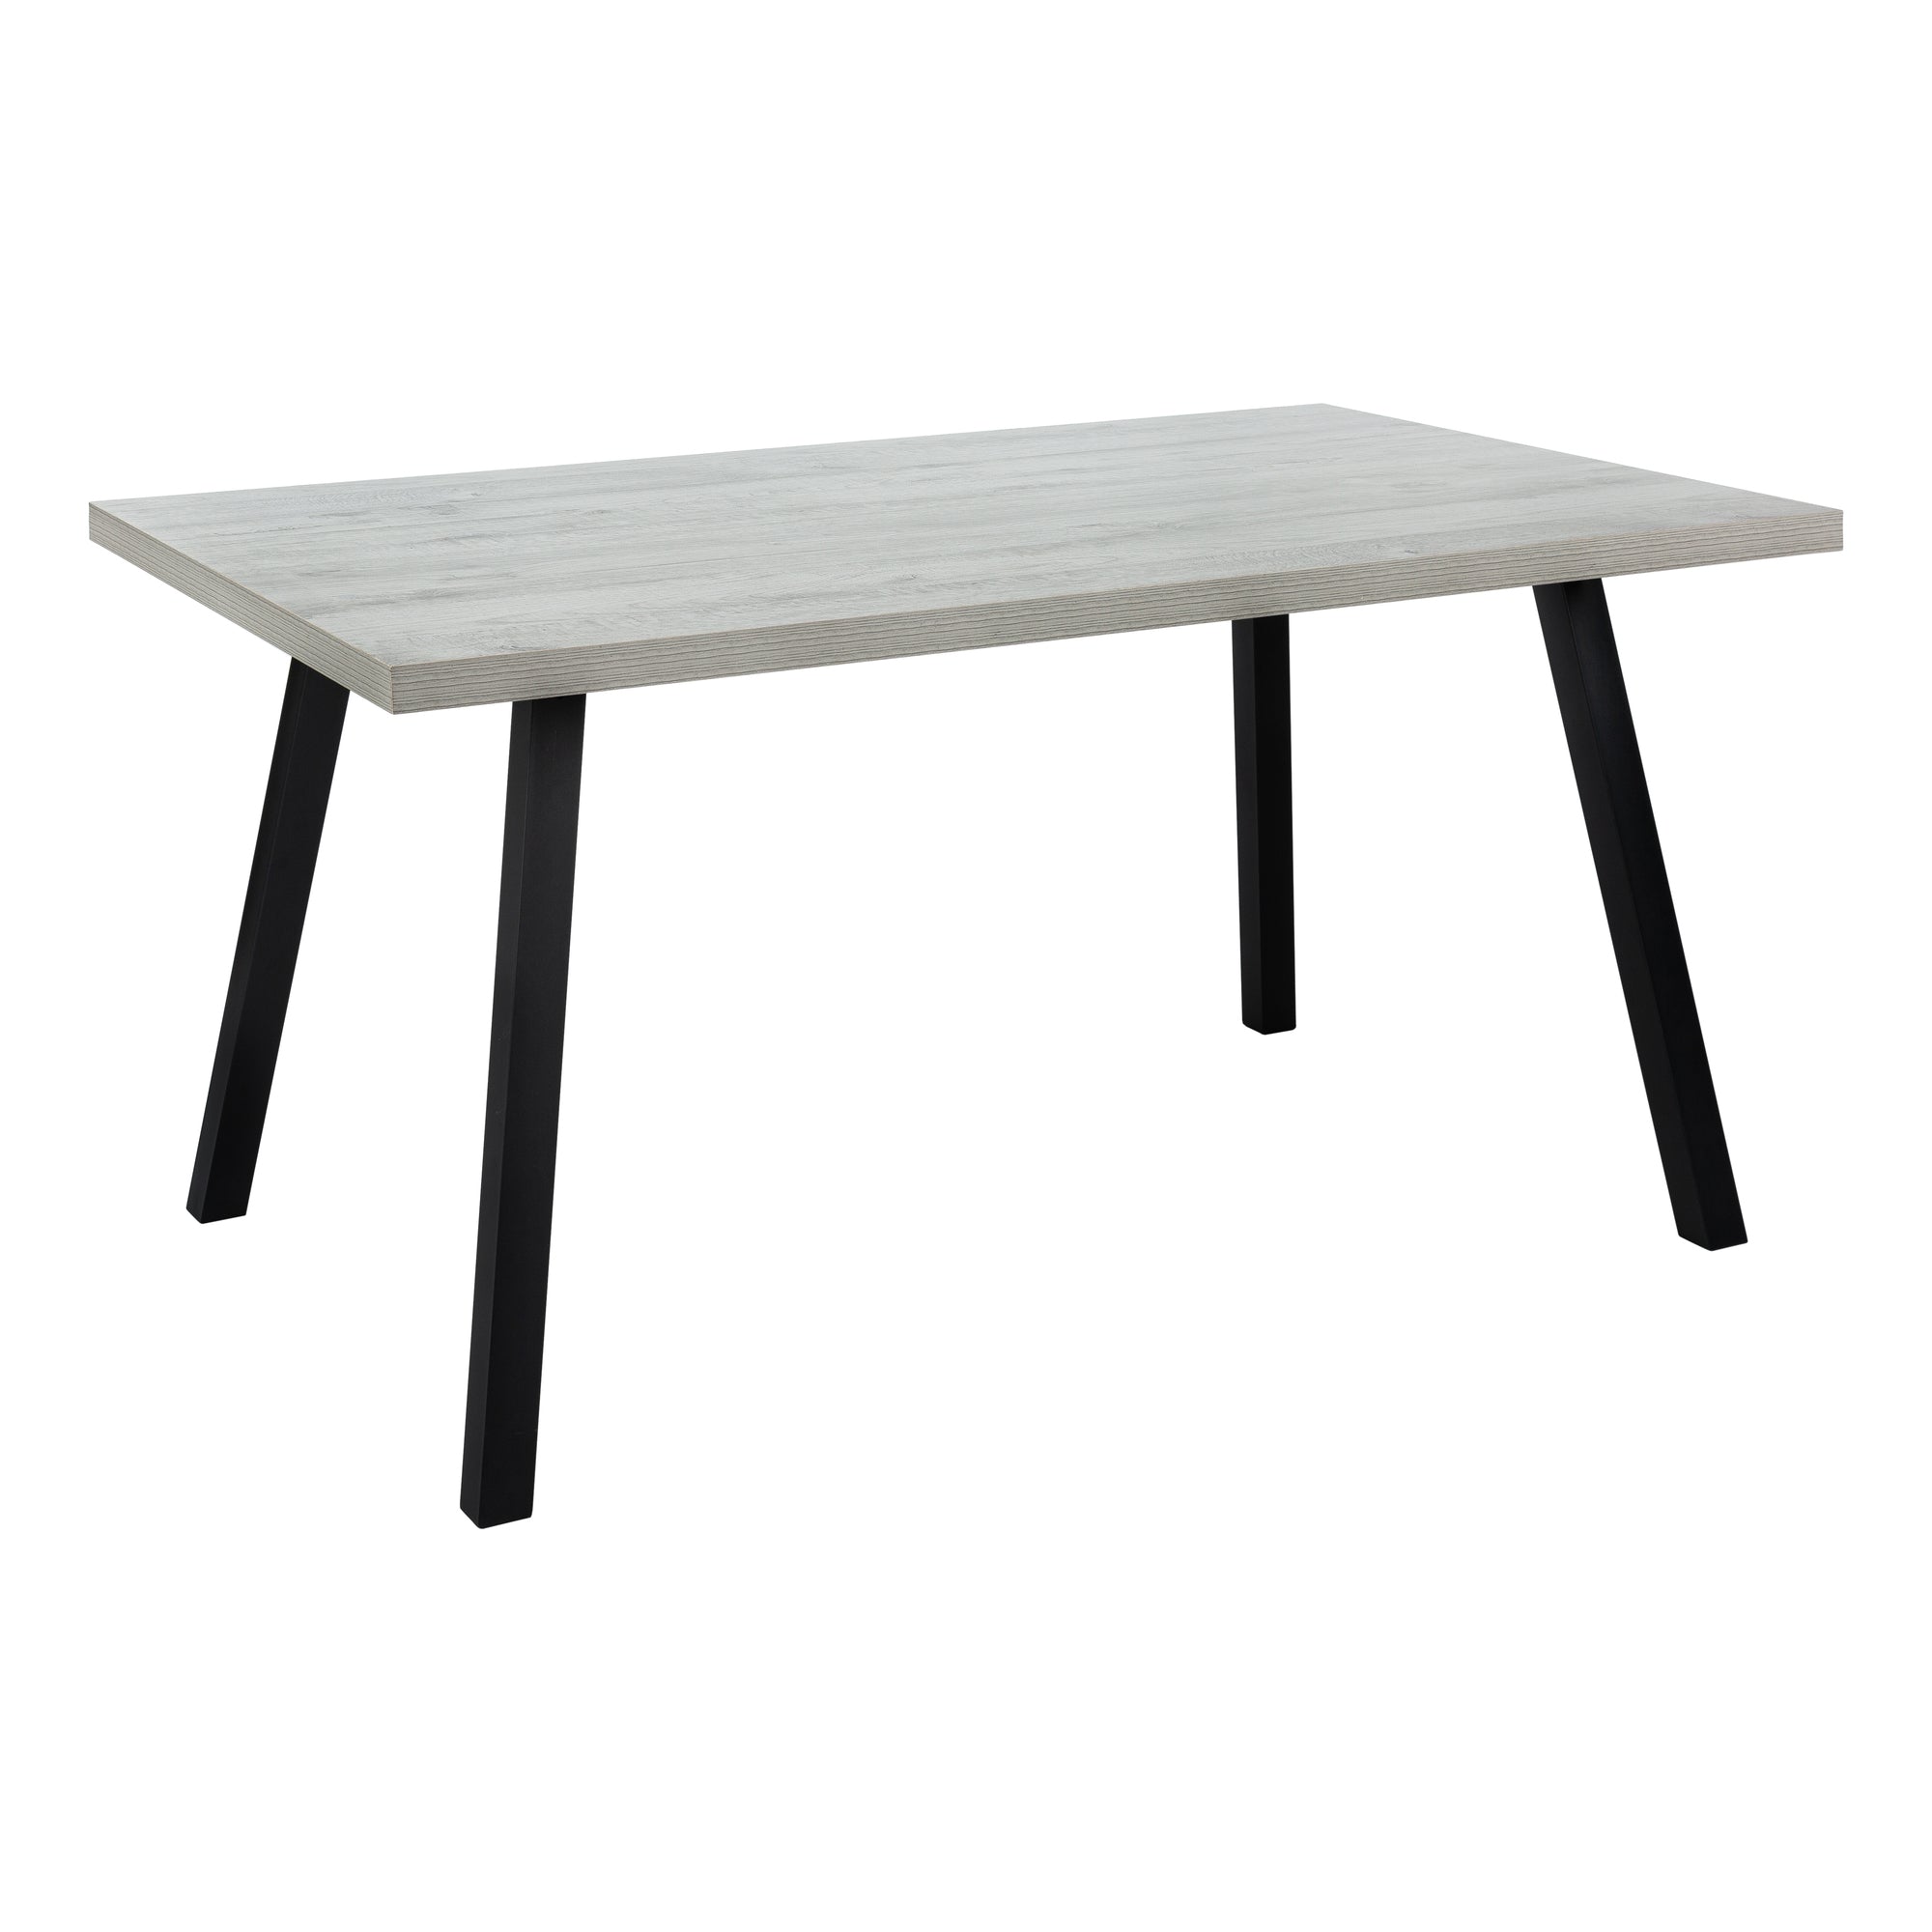 Ember 36" x 60" Dining Table With metal Legs (Grey)